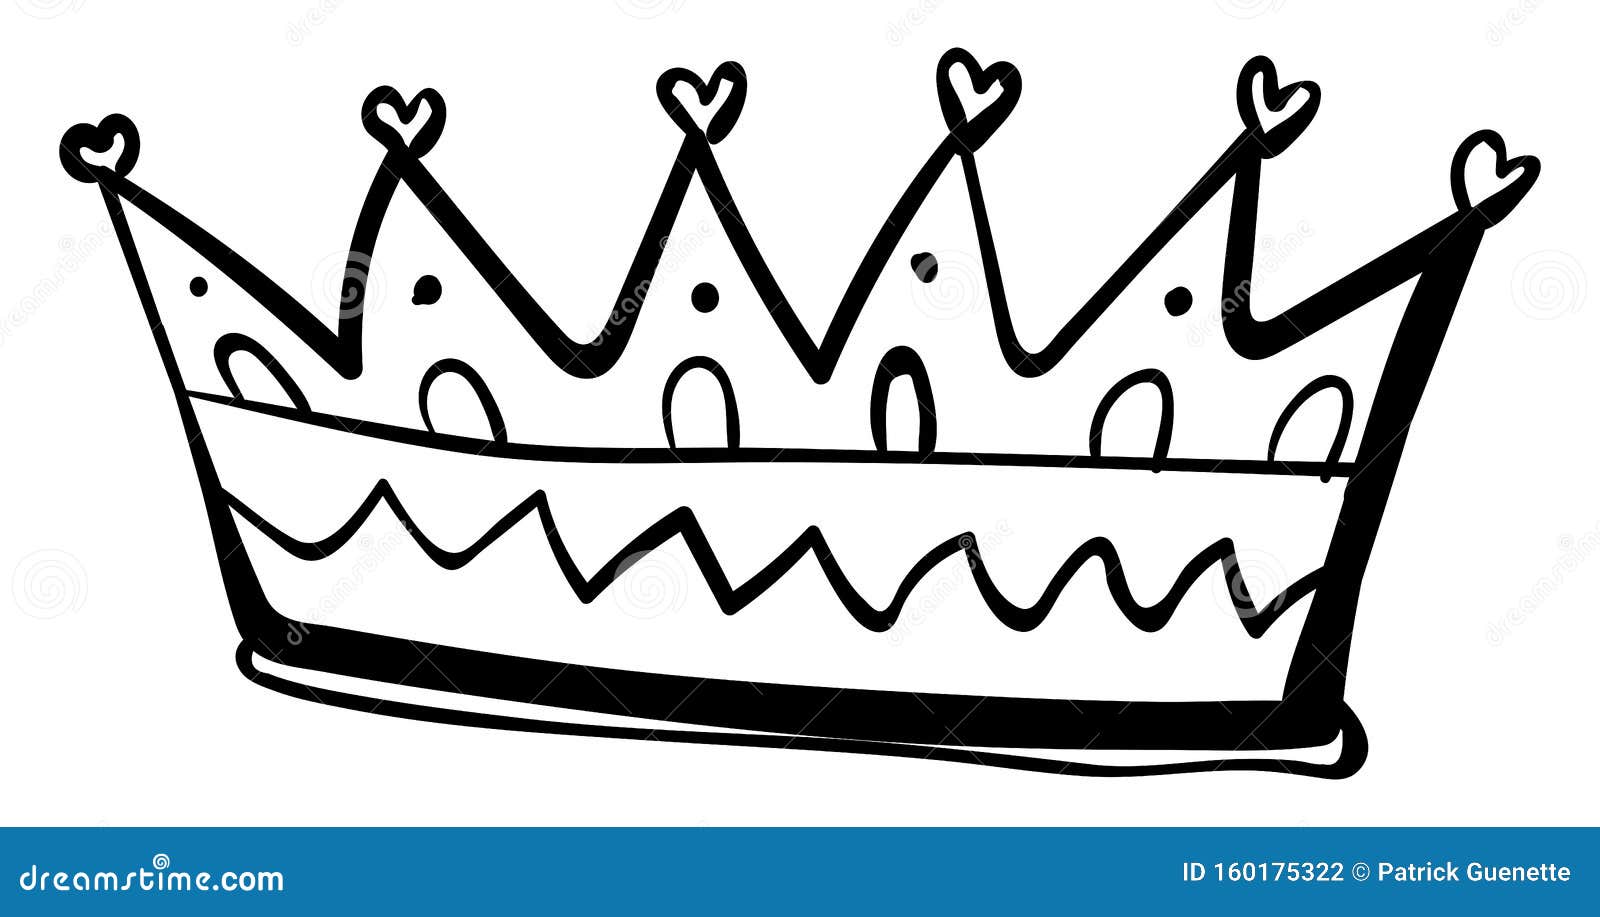 Crown Drawing, Illustration, Vector Stock Vector - Illustration of hand ...